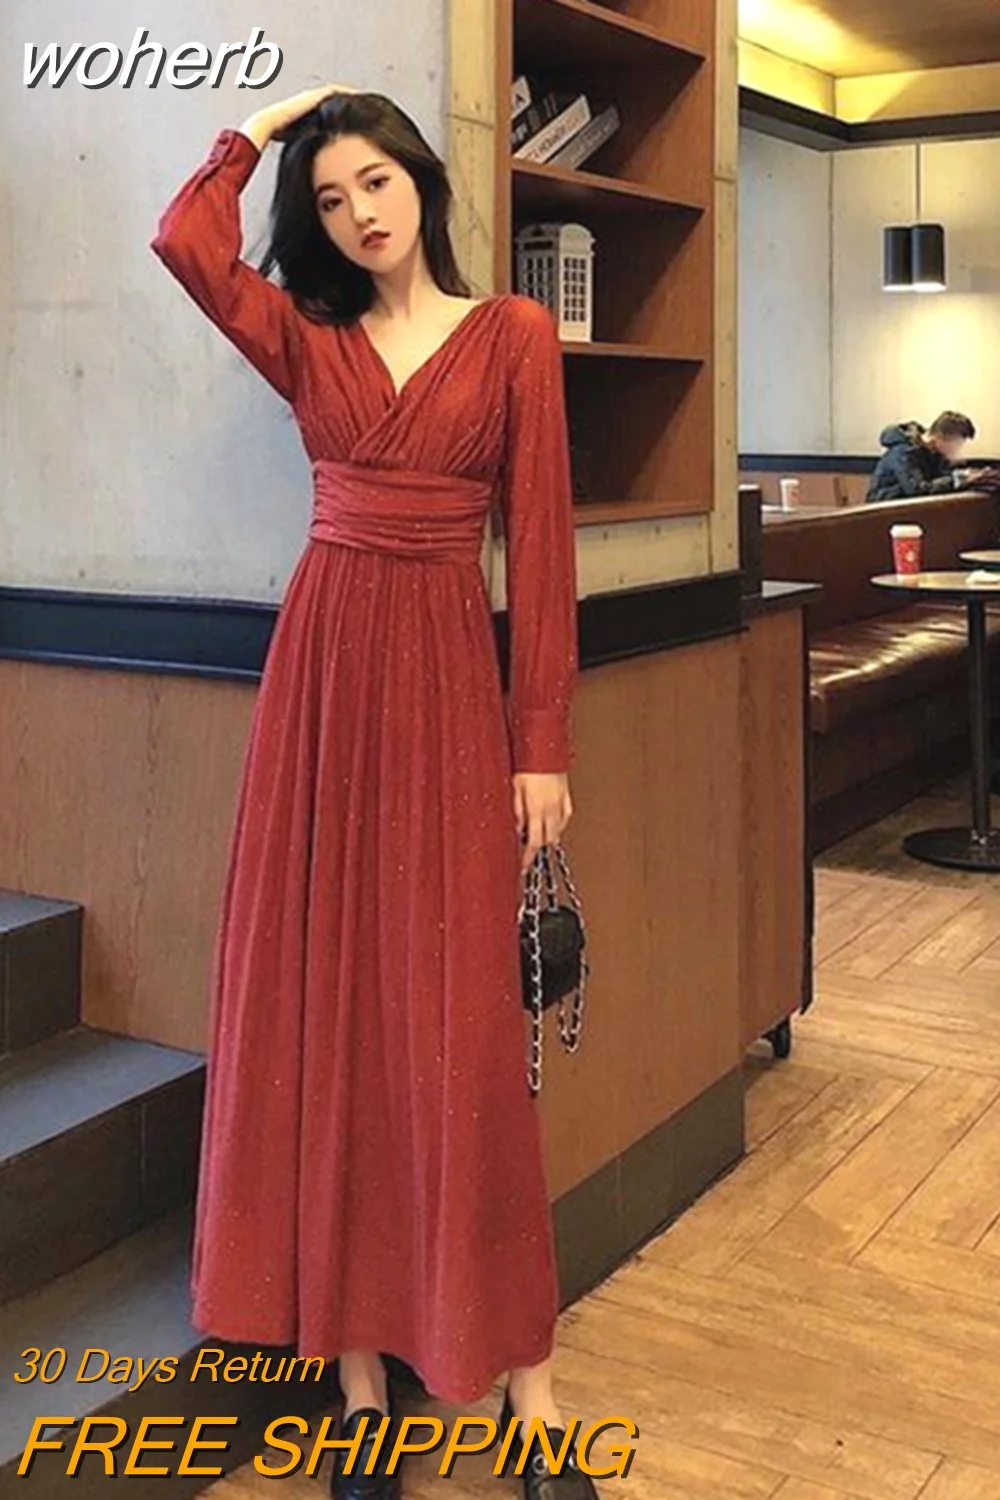 woherb Sleeve Dress Women Autumn Ankle-length Female Elegant Solid Bright-silk Stylish Vintage French Style Party Ulzzang Trendy